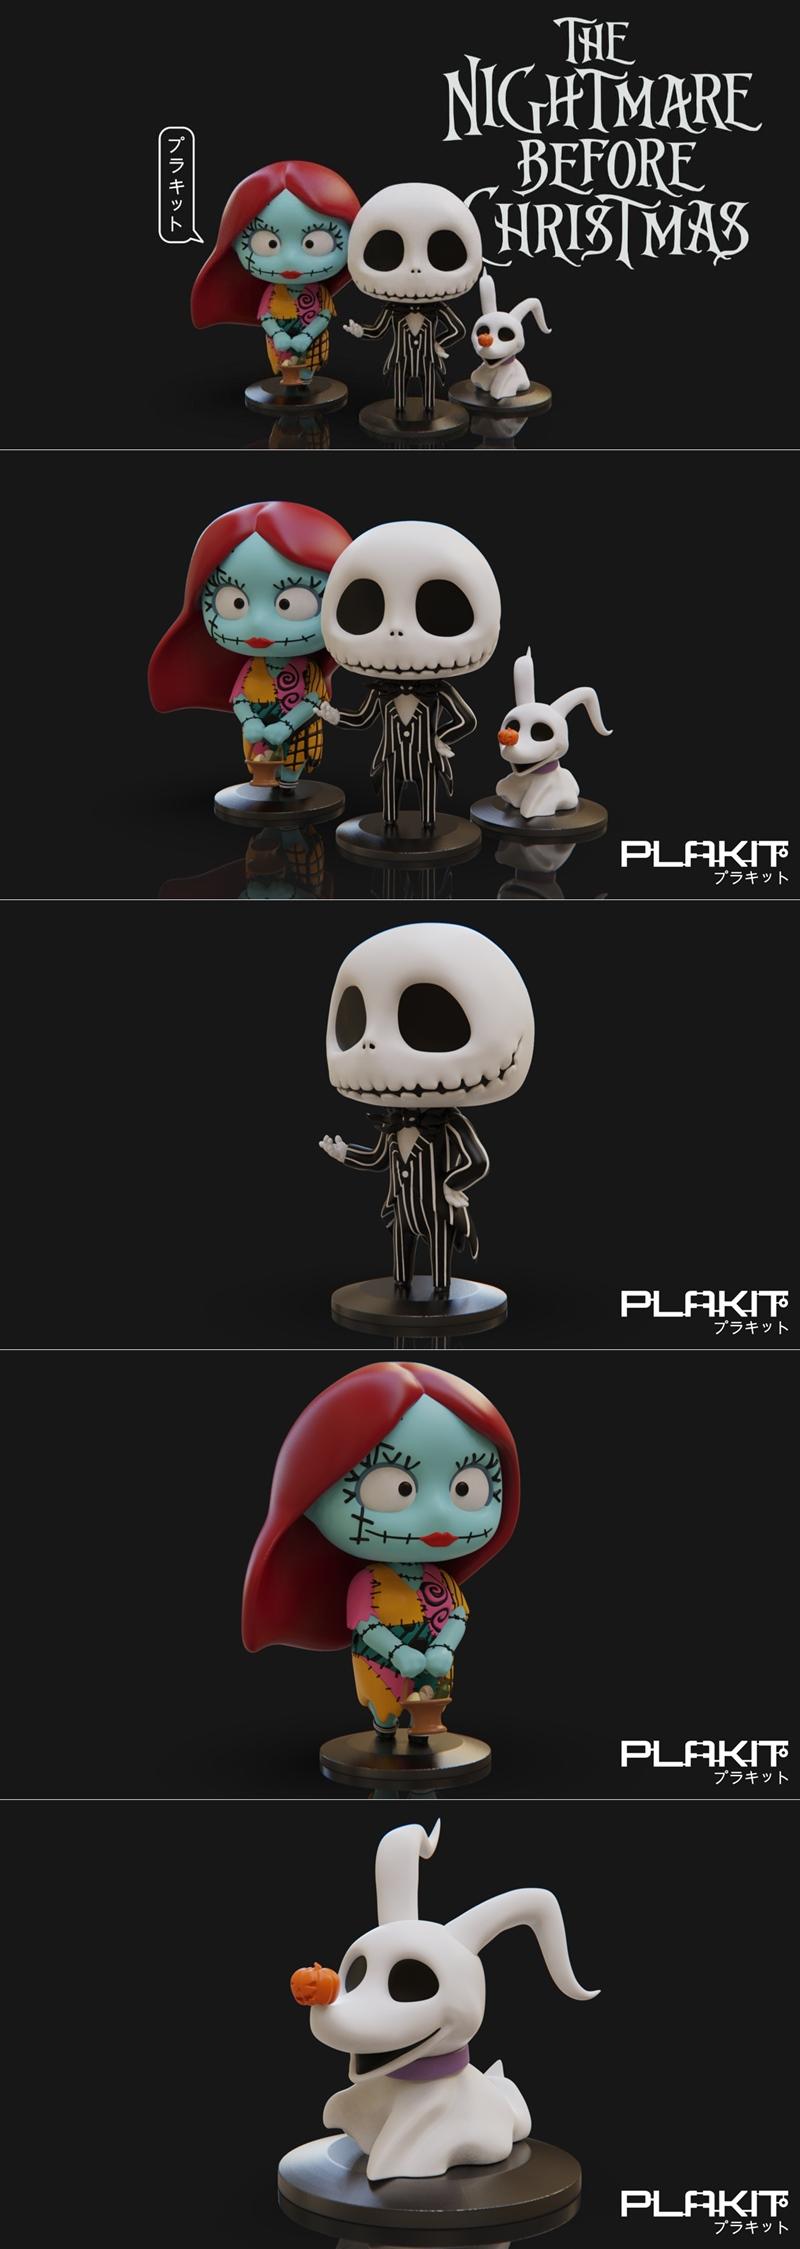 The Nightmare Before Christmas – 3D Print